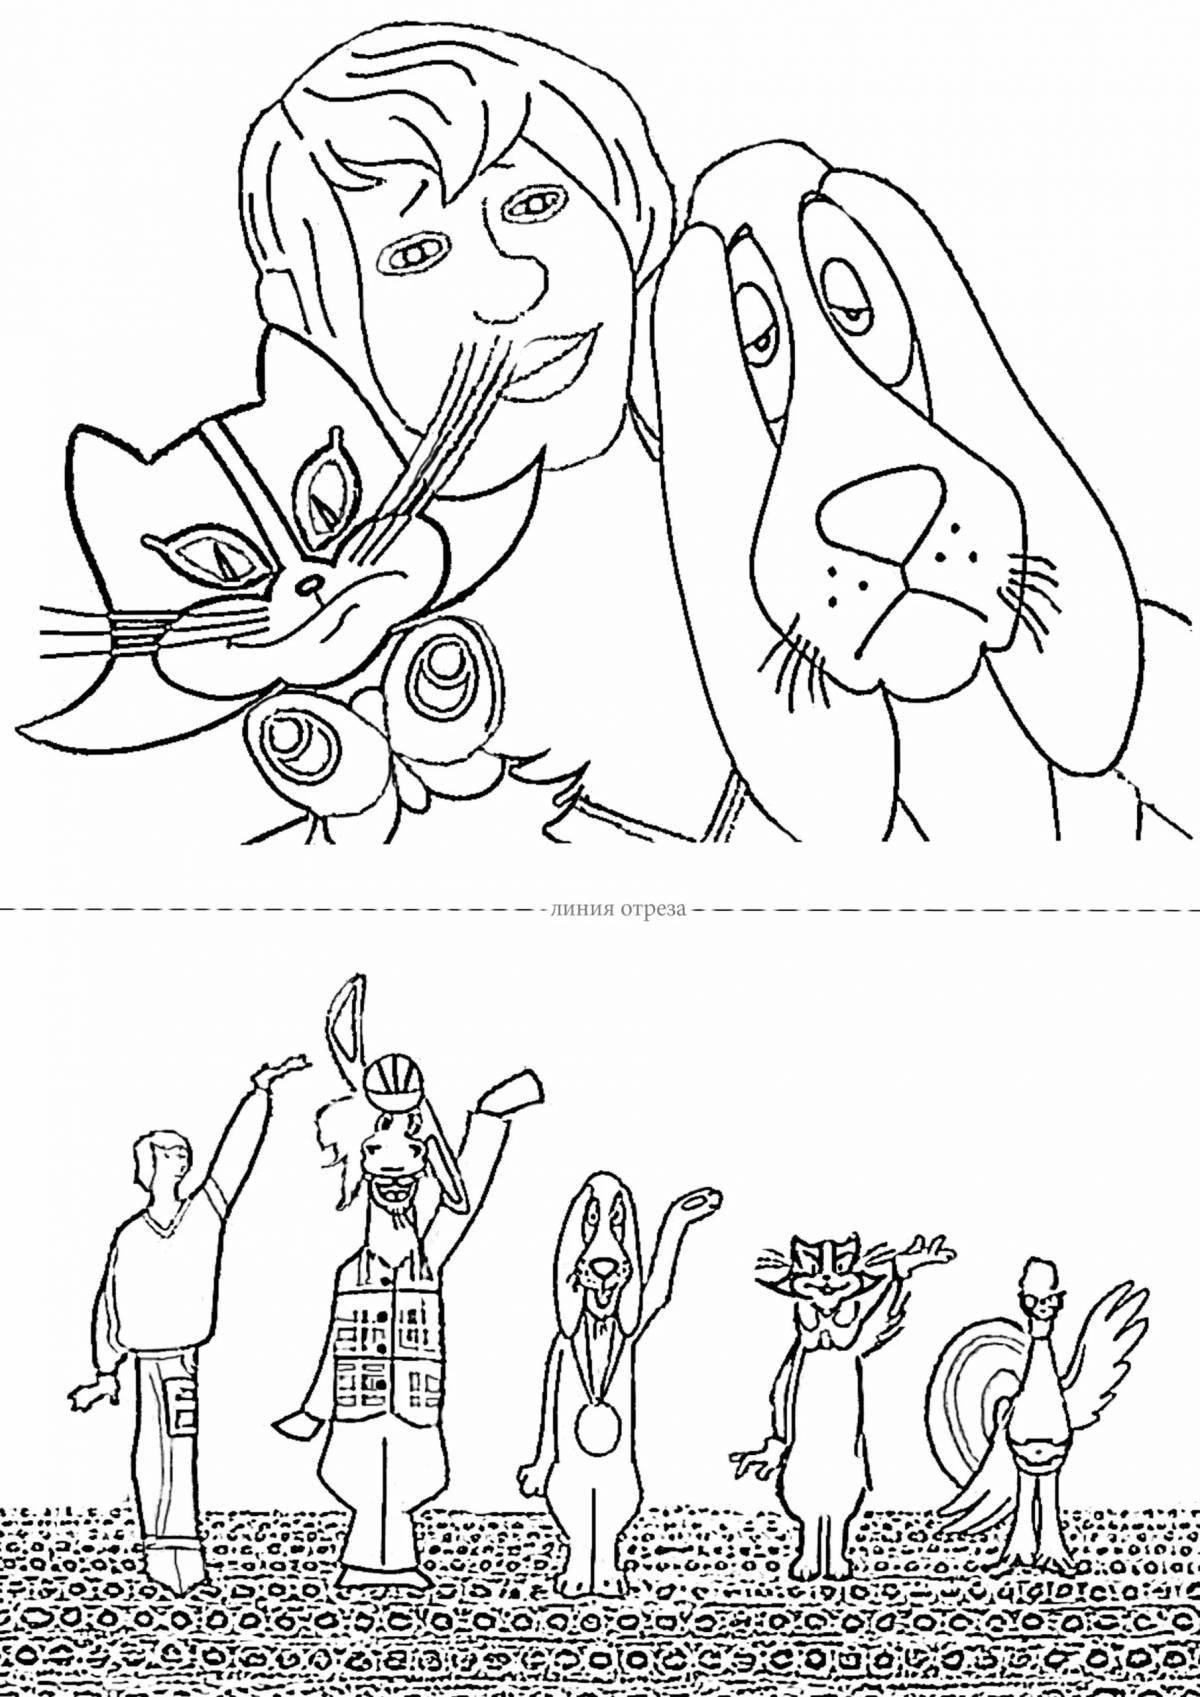 Exciting coloring pages Bremen town musicians